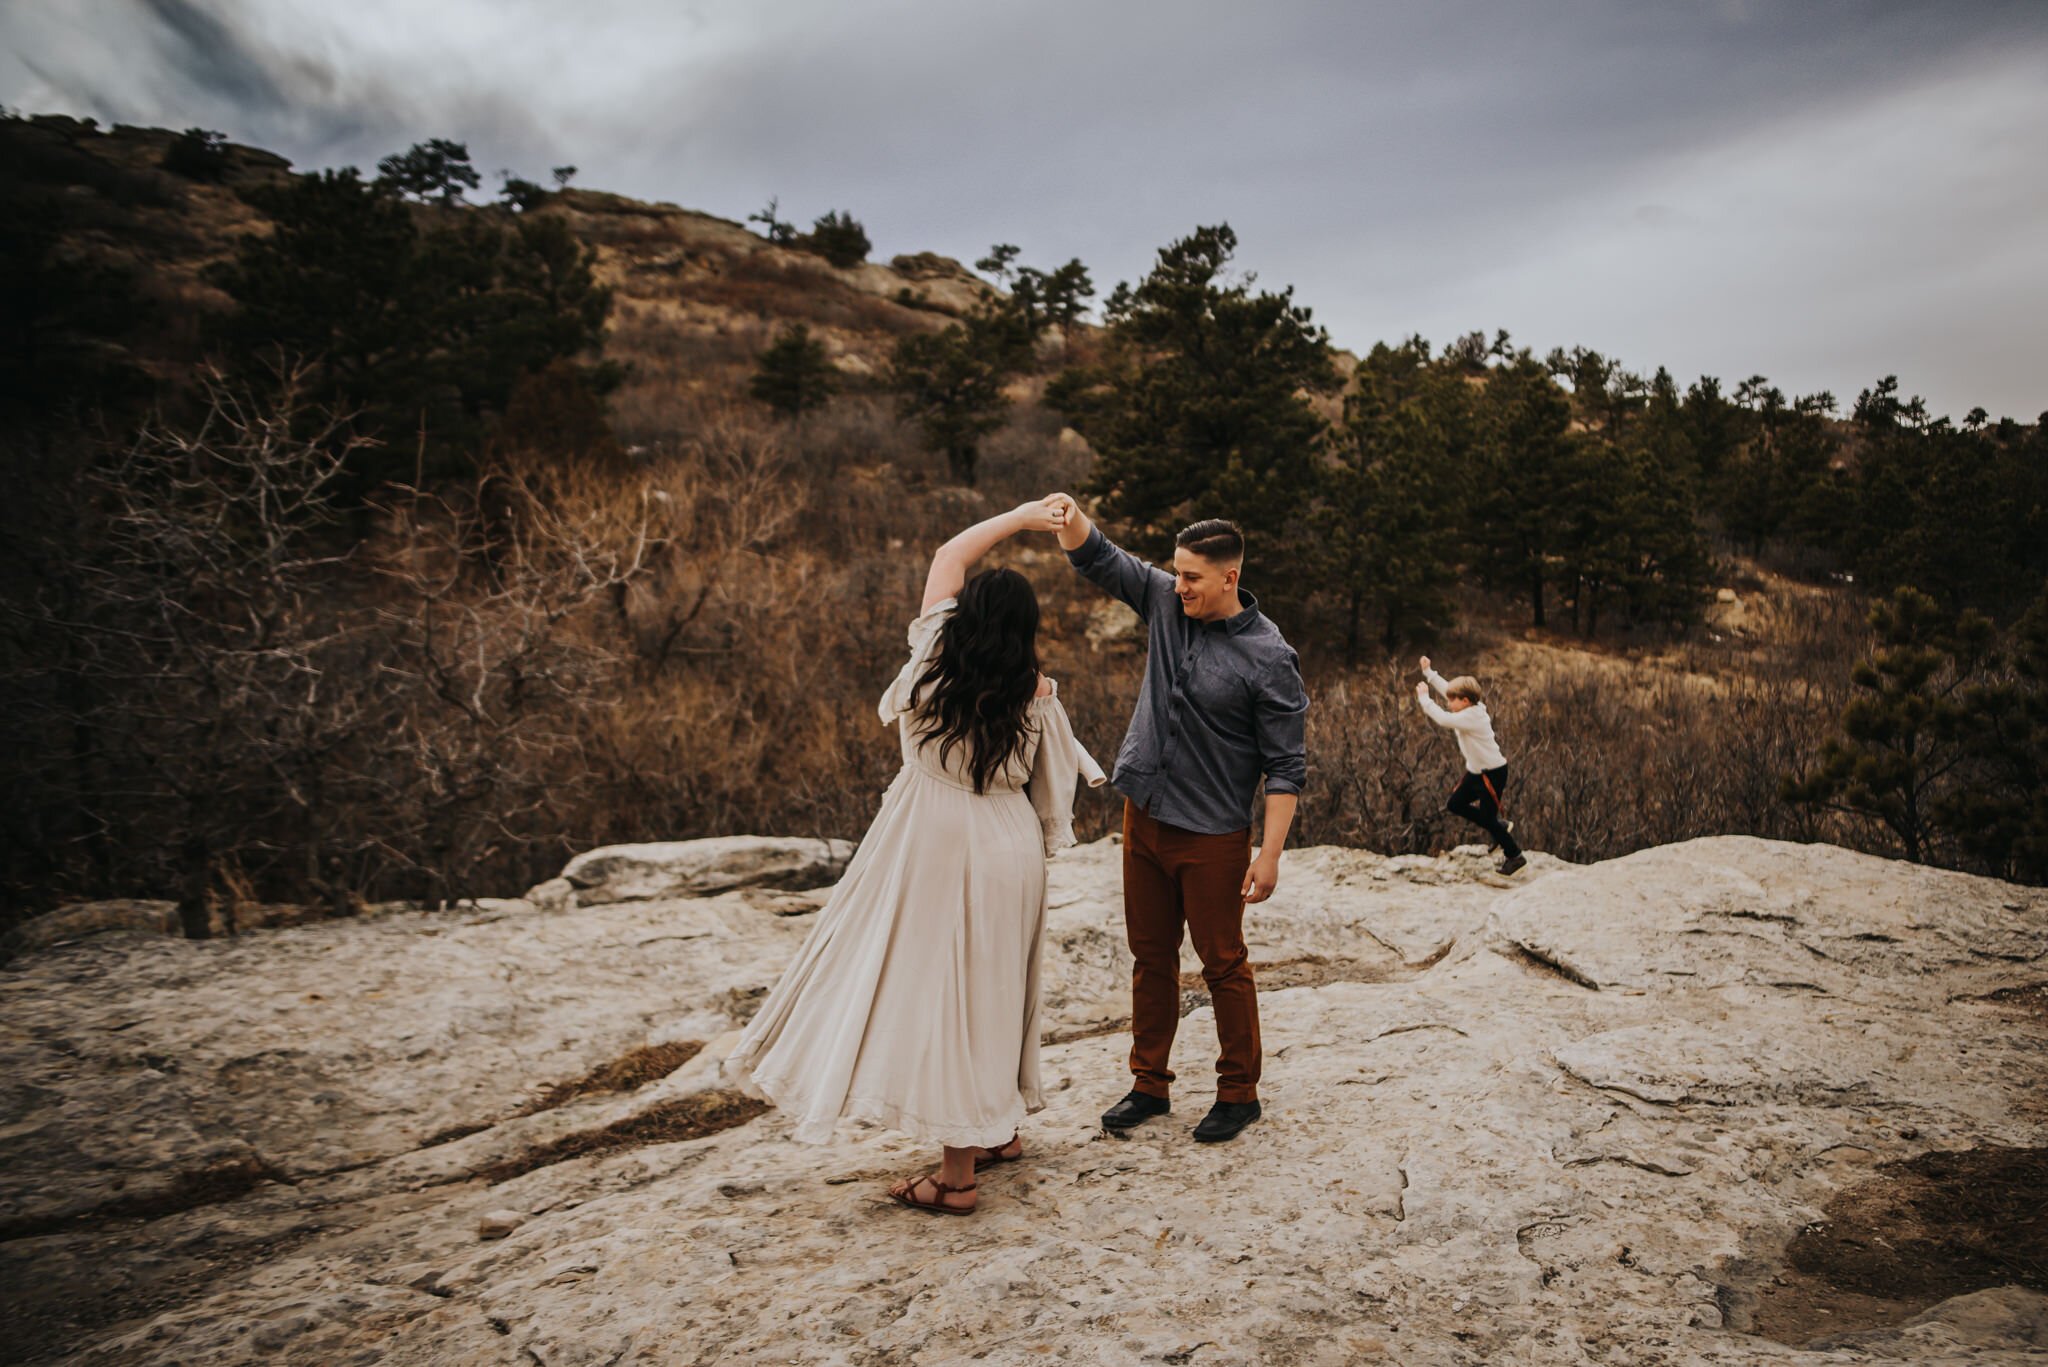 Miller+Family+Session+Mentorship+Colorado+Springs+Colorado+Sunset+Ute+Valley+Park+Mountains+Fields+Mom+Dad+Son+Daughter+Baby+Wild+Prairie+Photography-21-2020.jpeg